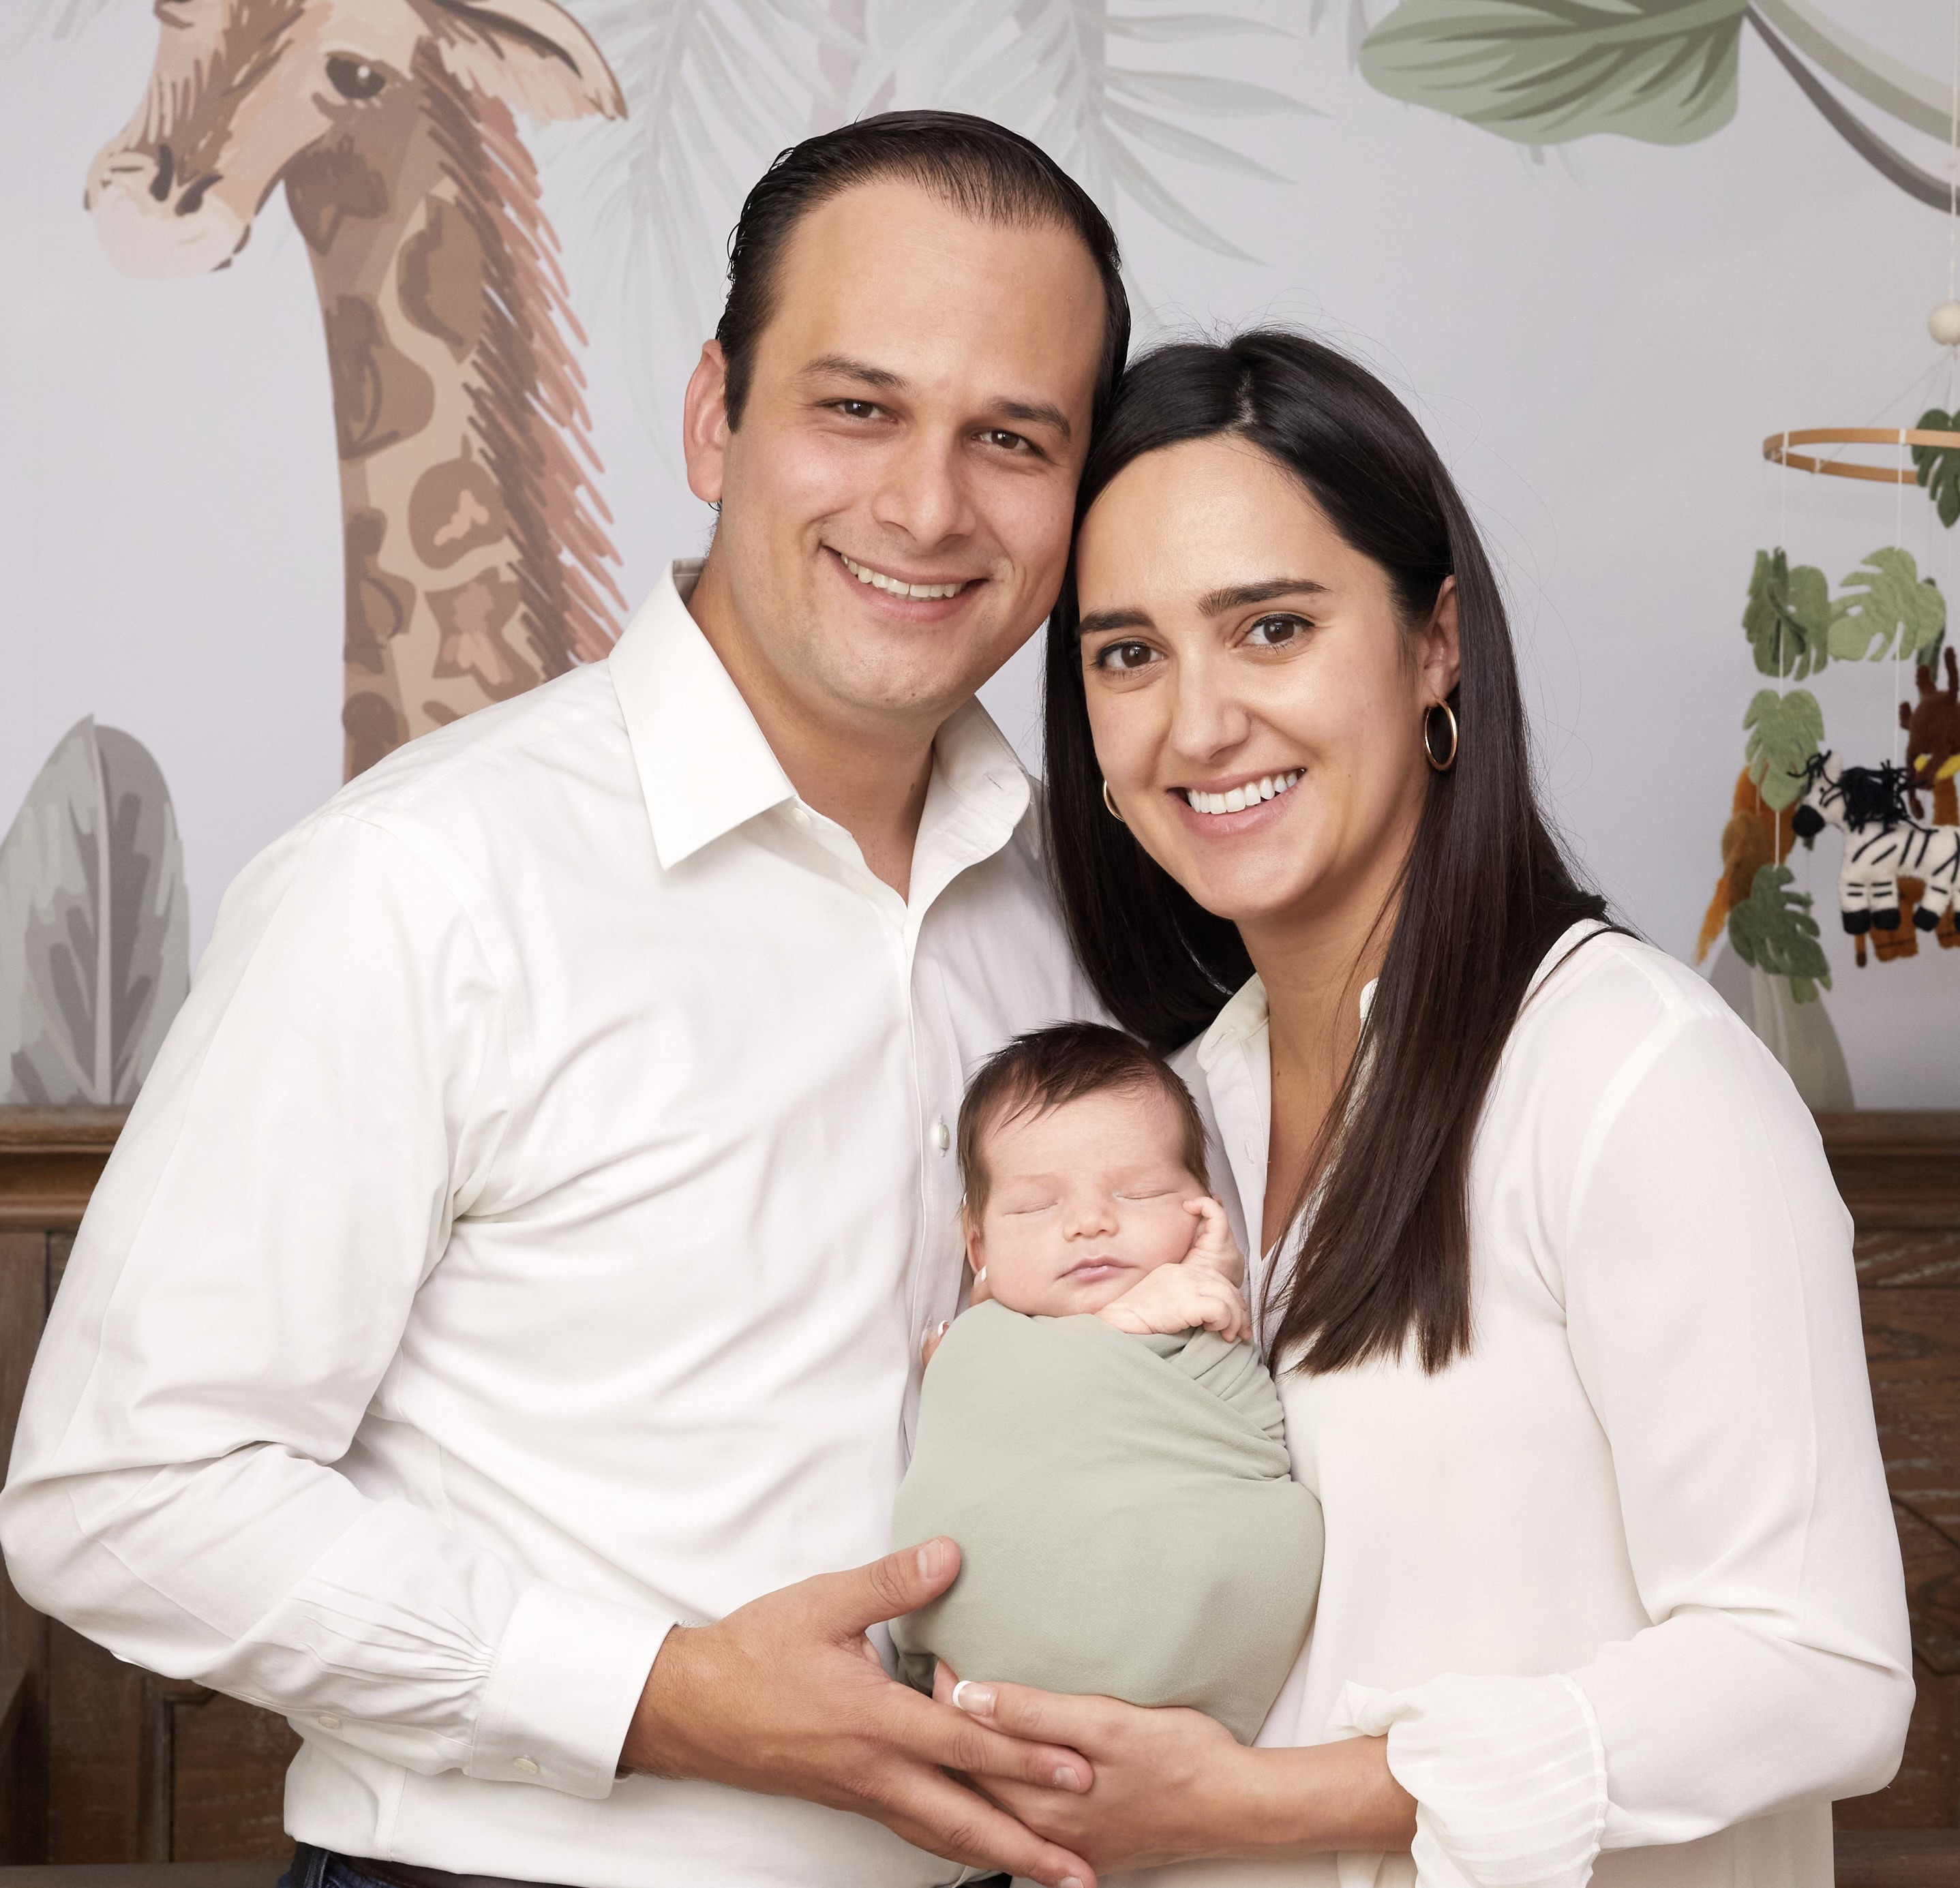 Councilmember Campillo, wife, and baby